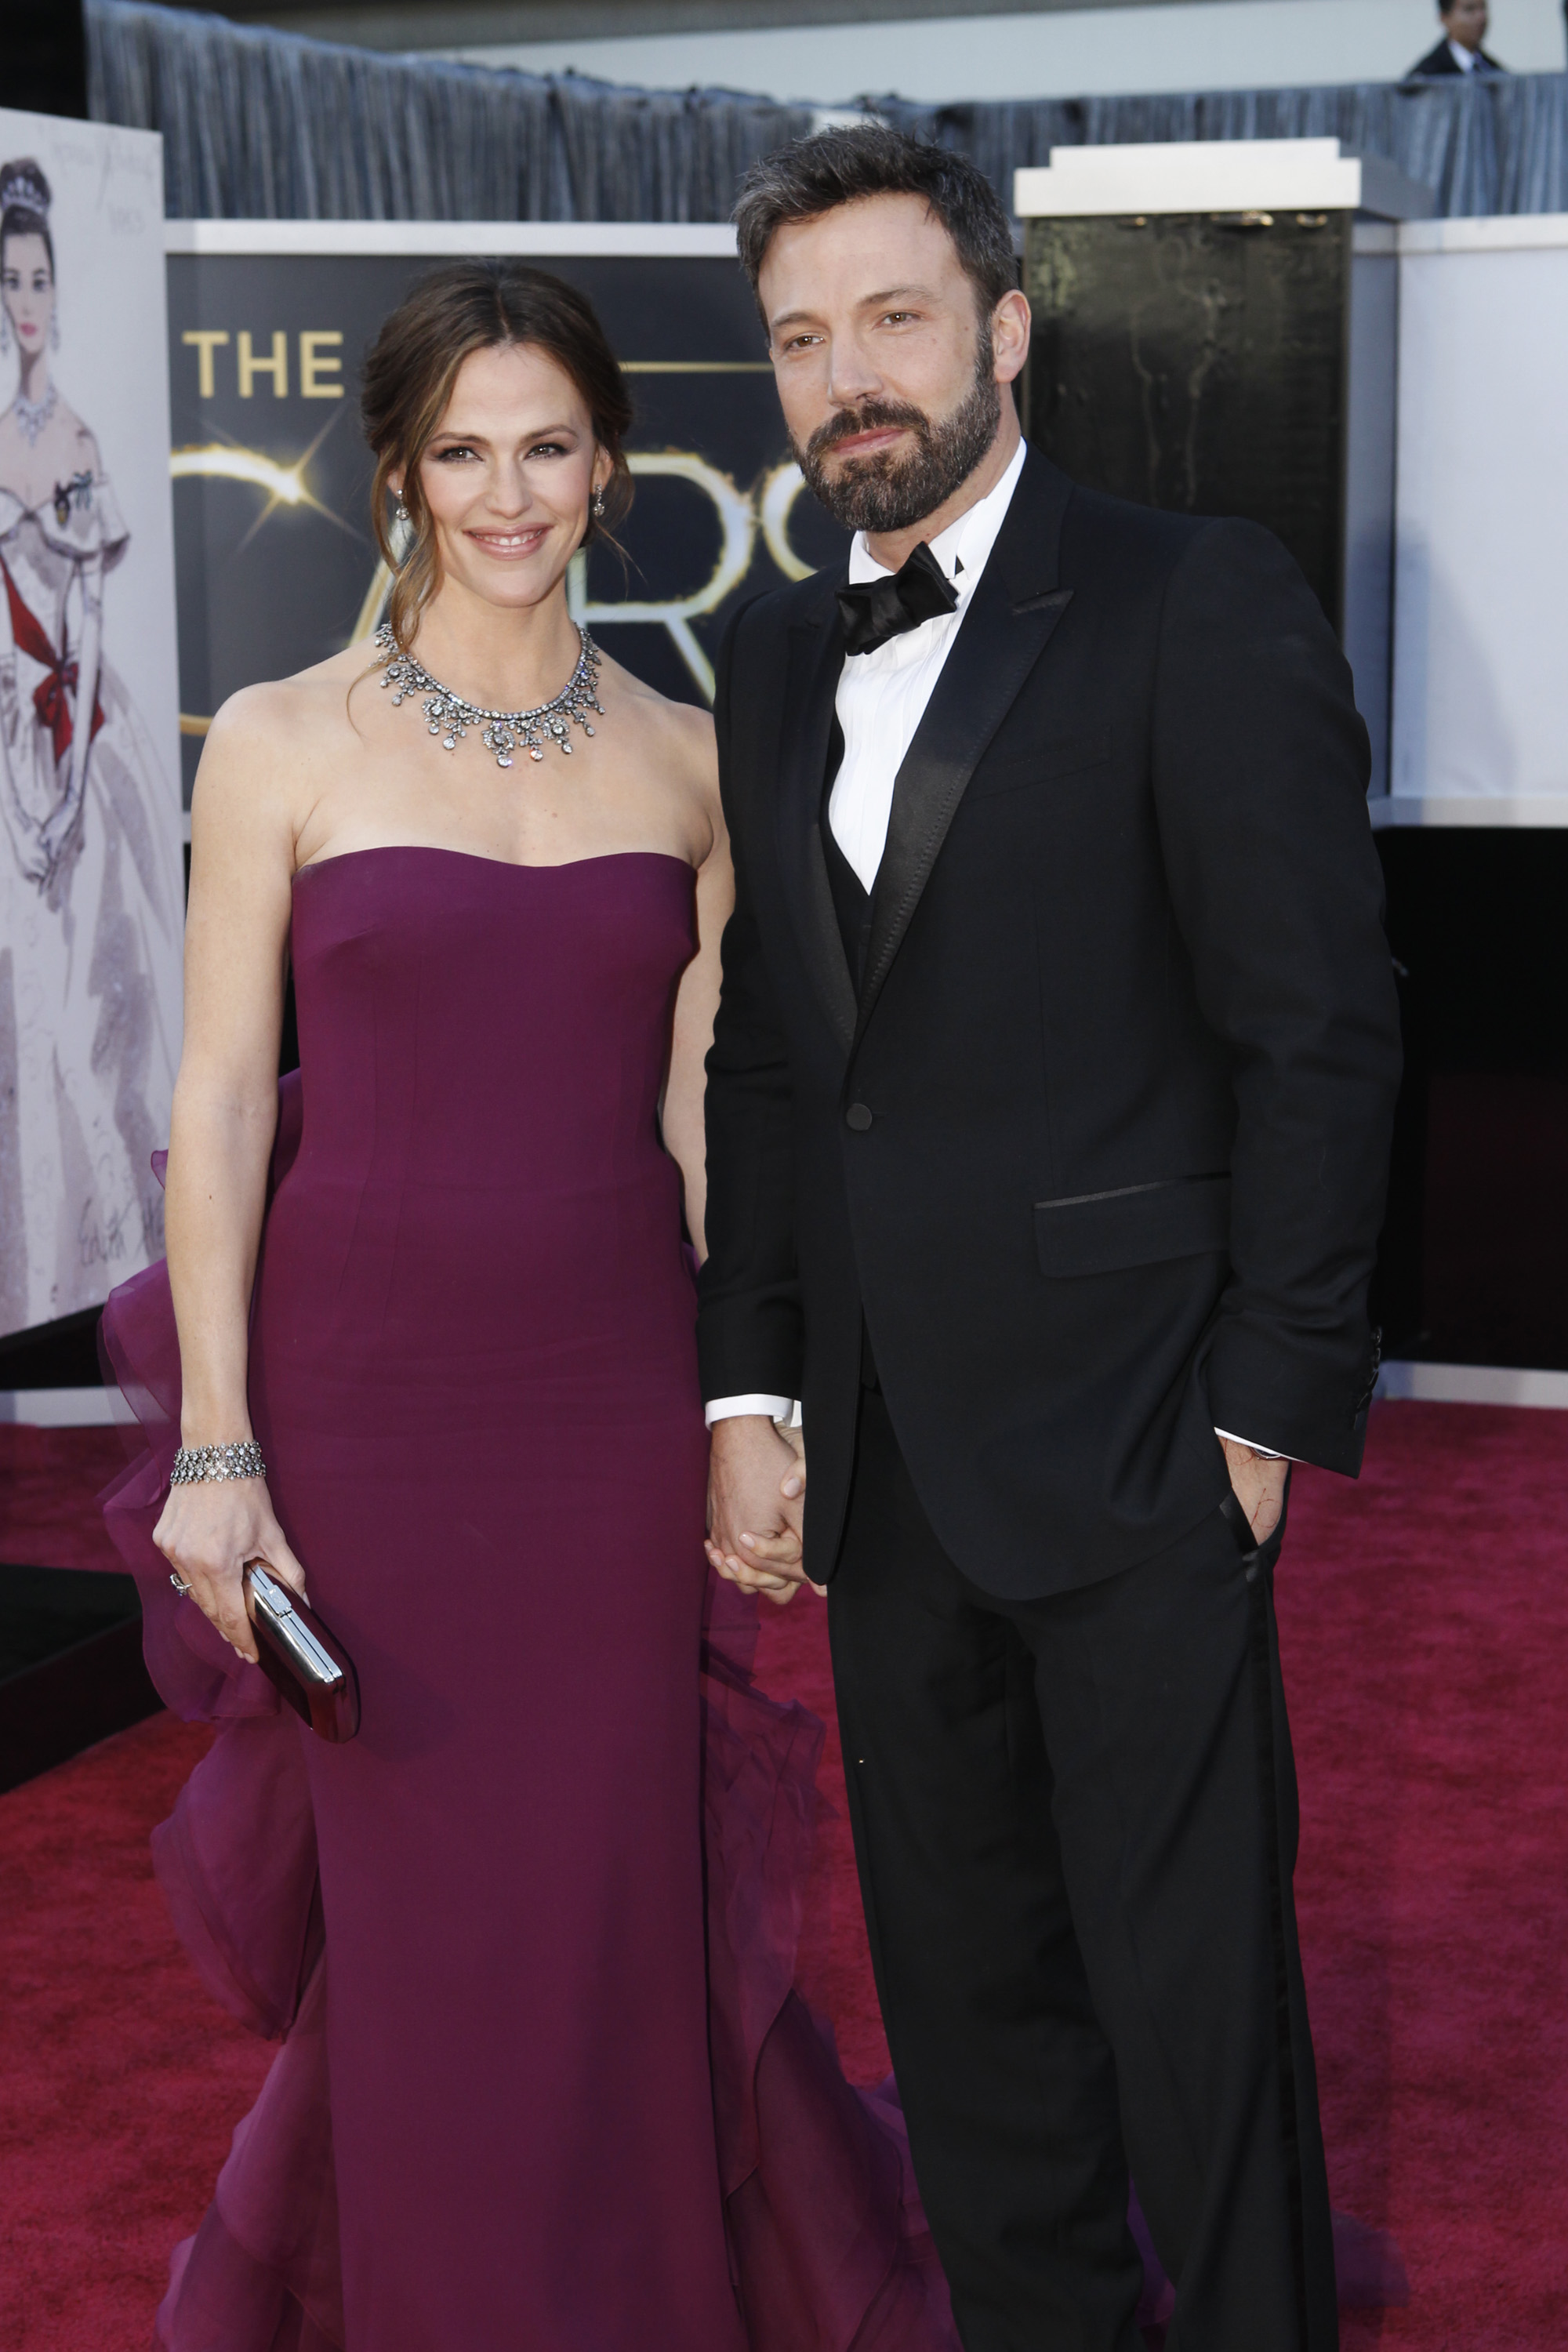 Jennifer Garner and Ben Affleck at the 85th Academy Awards on February 24, 2013 | Source: Getty Images